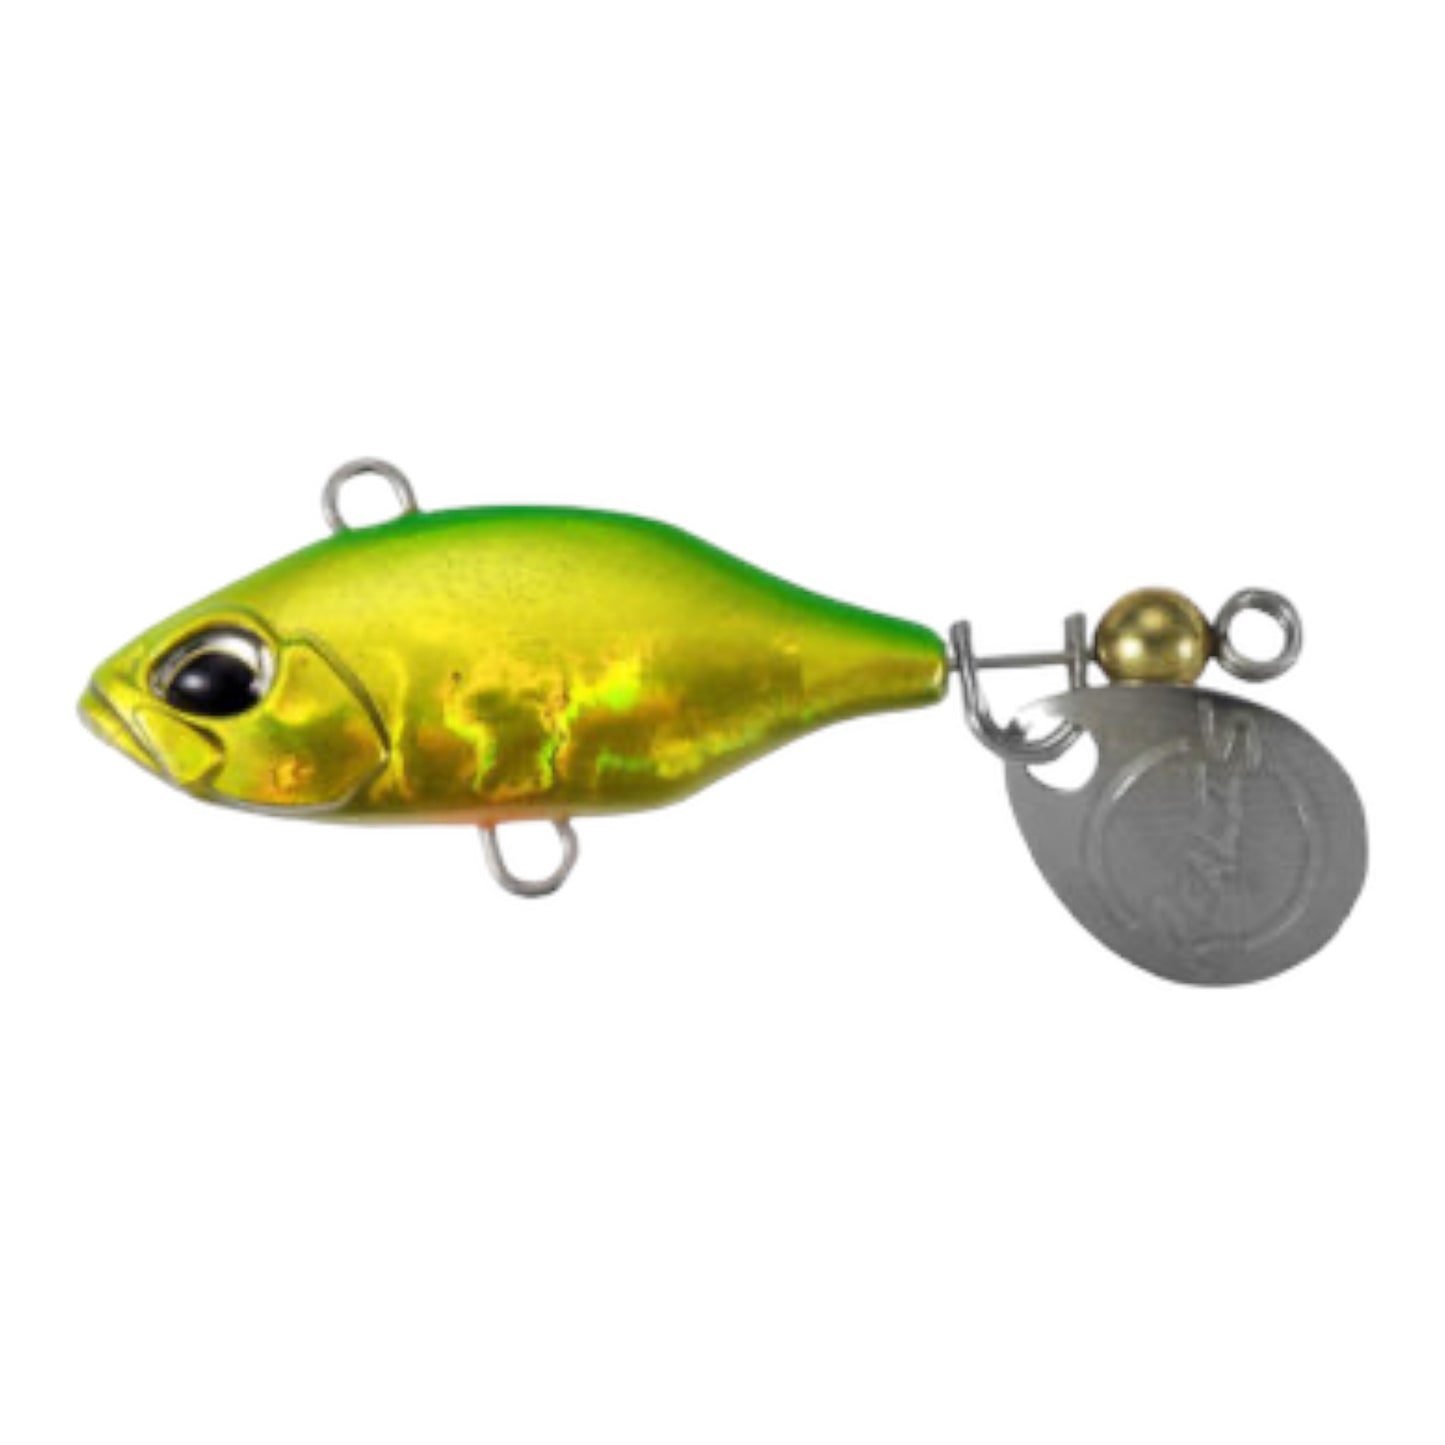 DUO Realis Spin Tail Spin Lure